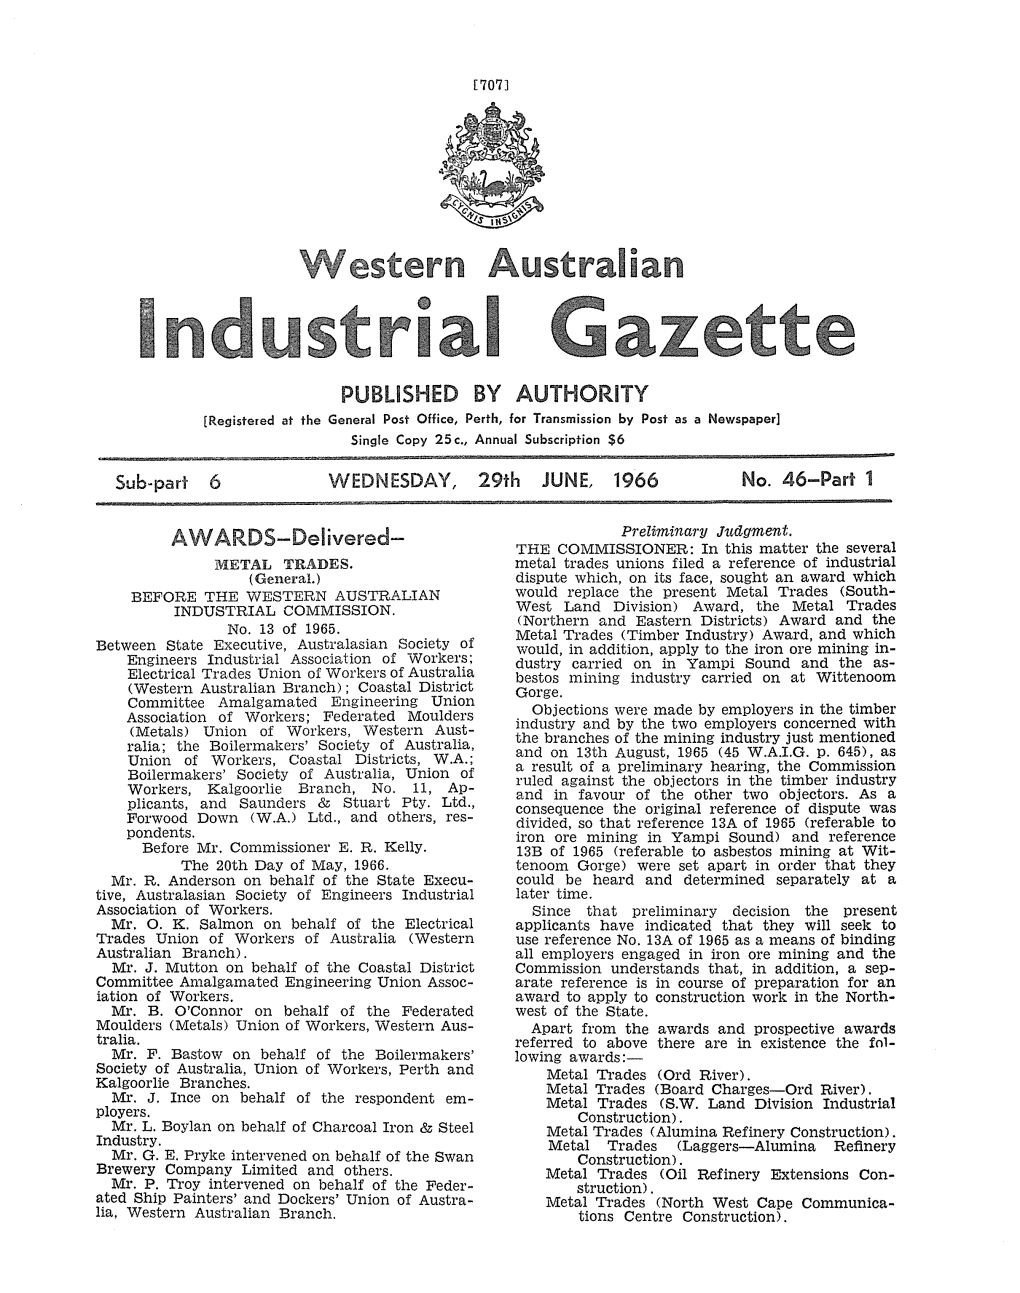 Registered at the General Post Office, Perth, for Transmission by Post As a Newspaper] Single Copy 25 C., Annual Subscription $6